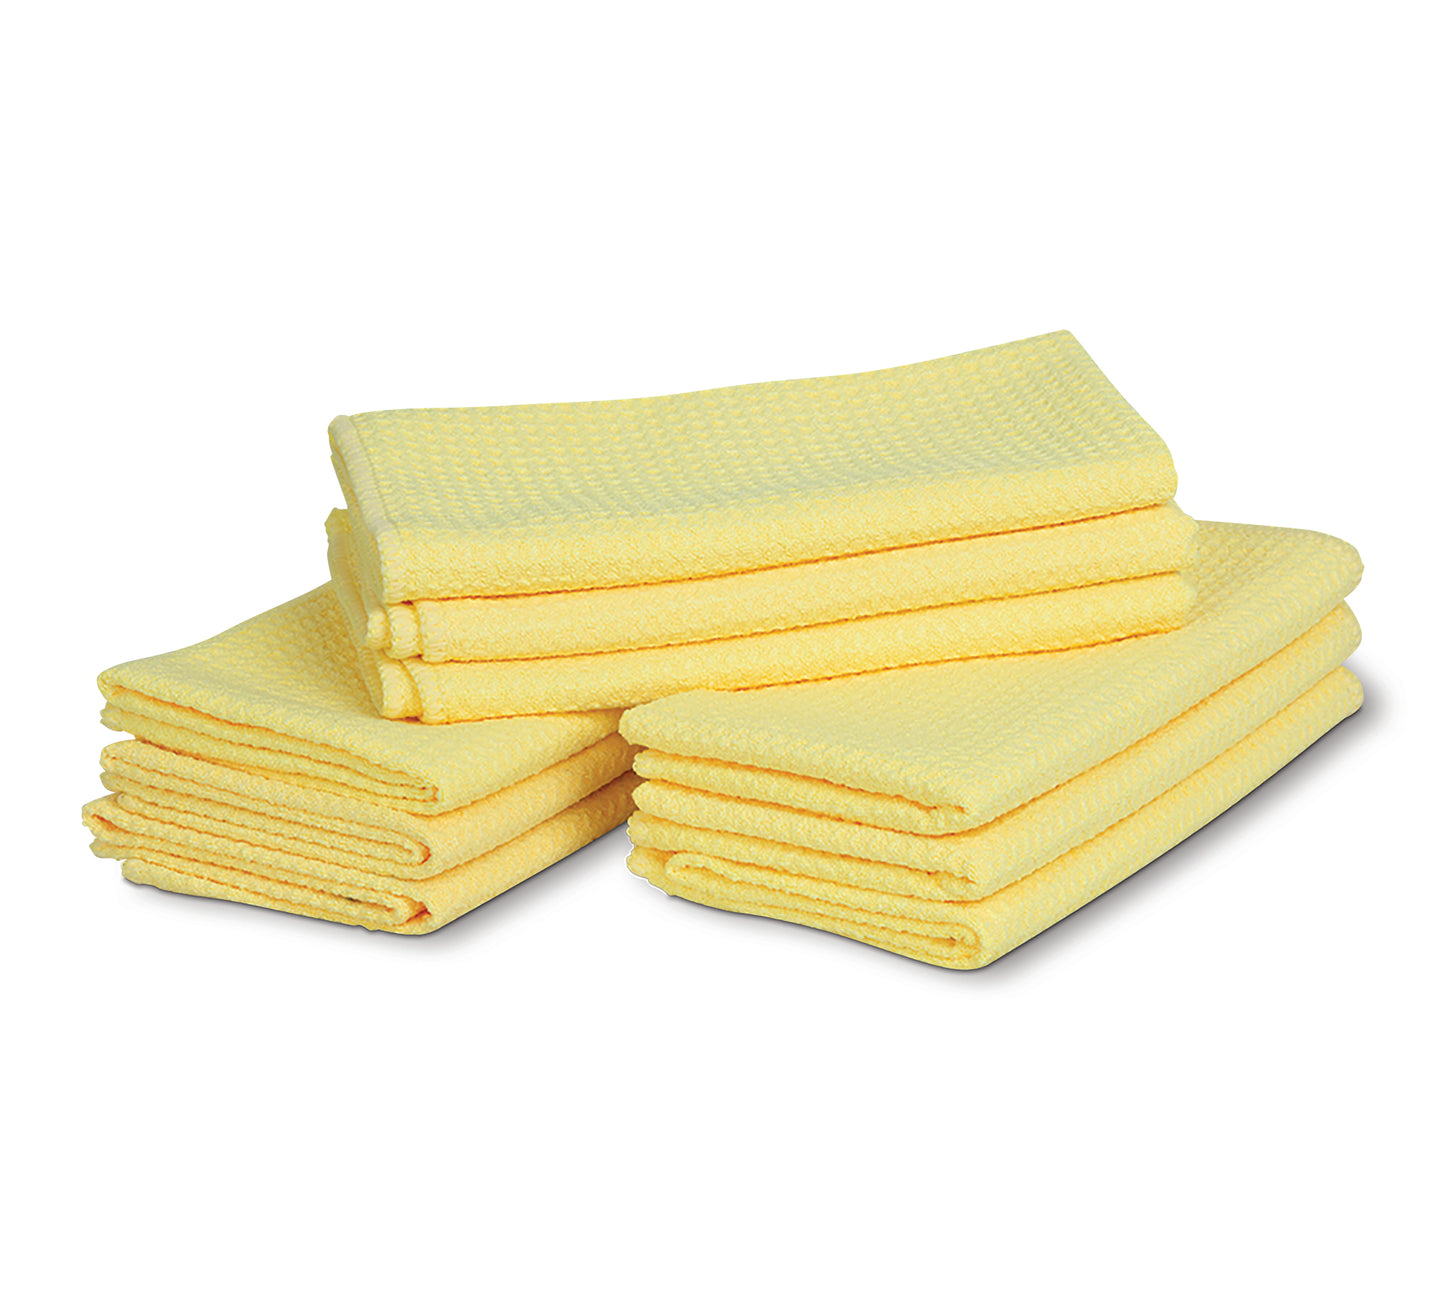 MicroClean Glass Towels Lint Free Microfiber Cleaning Cloths For Cars,  Windows, And Home Use Polishing And Dusting Made Easy! From Newclean, $8.93